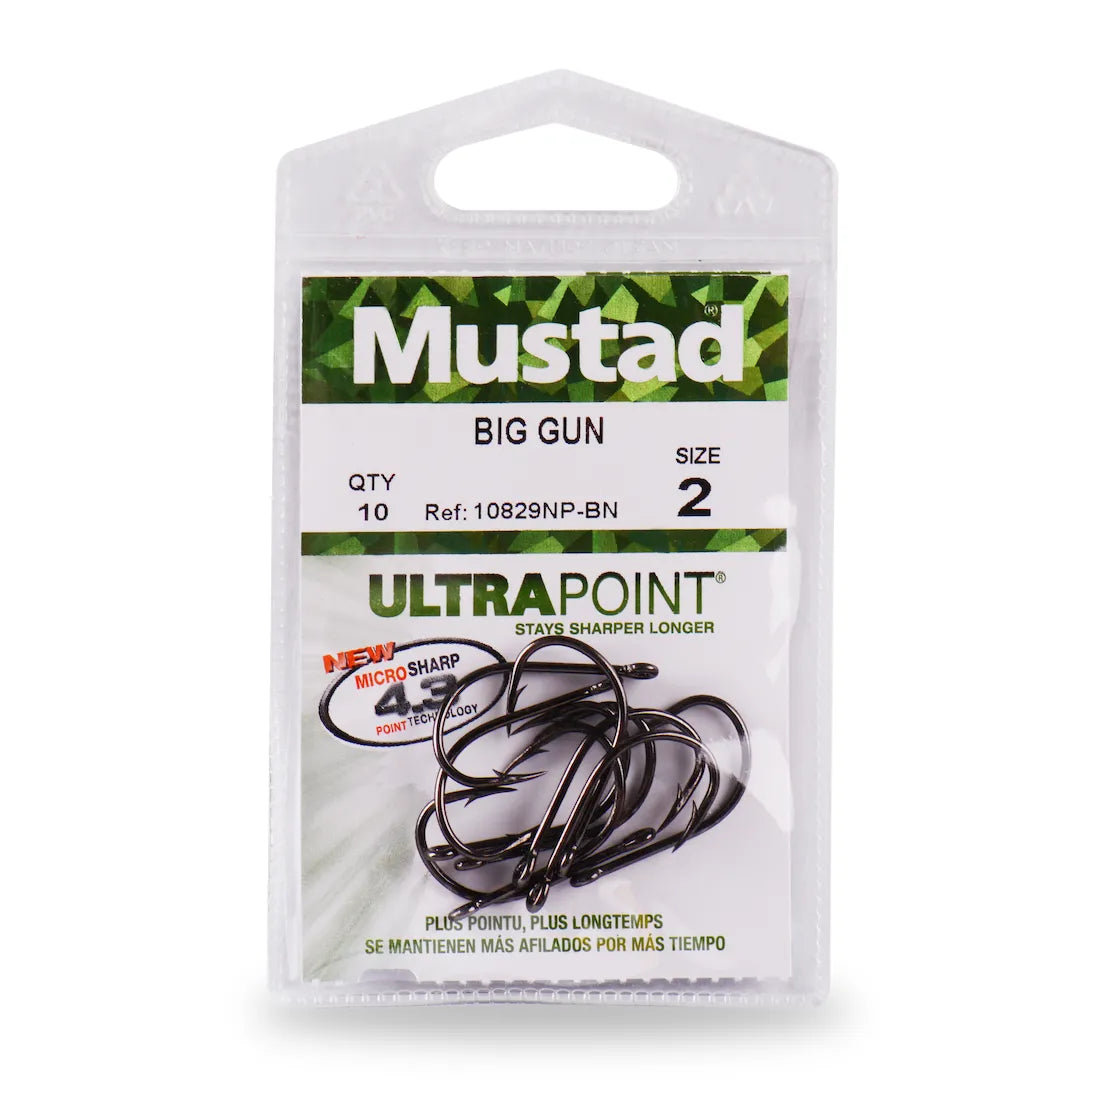 MUSTAD 39950 NP BN Strong Billfish Tournament Approved Demon Heavy Circle  Hooks Ultrapoint: Hooks Online at Pelagic Tribe Shop